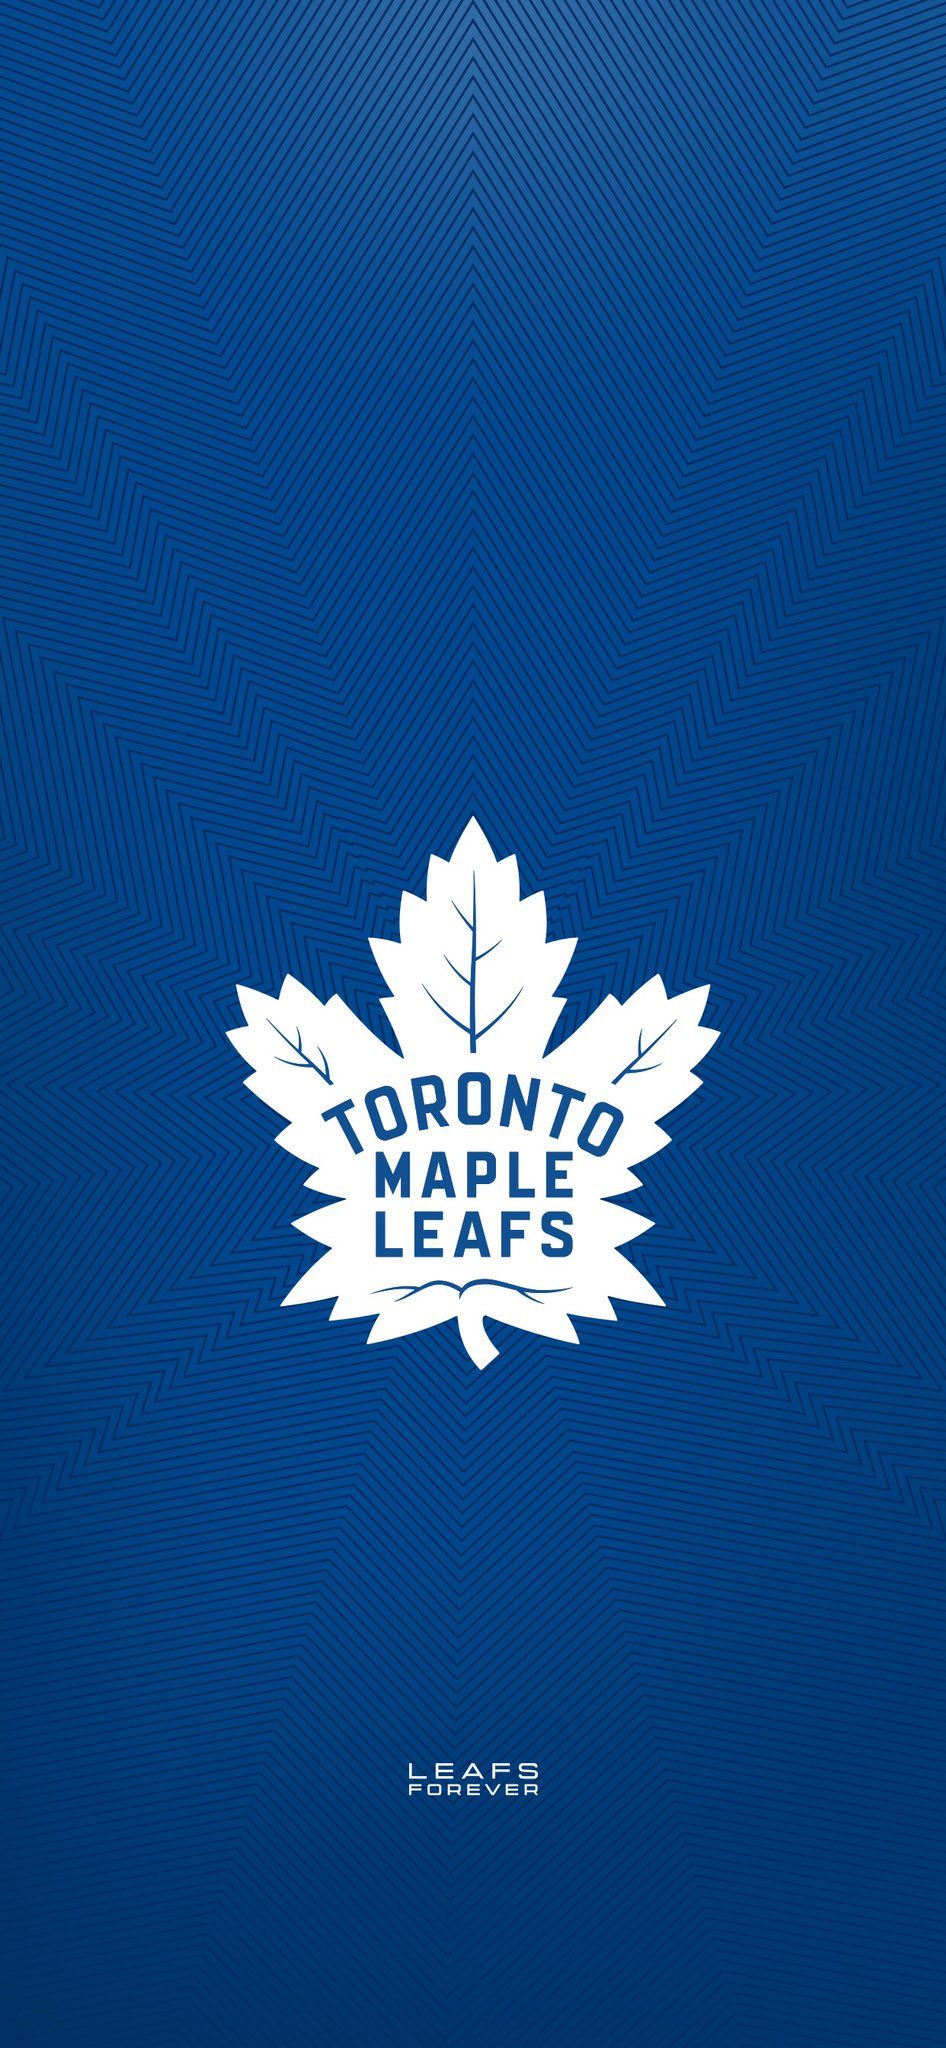 Toronto Maple Leafs on Twitter Represent Leafs Nation all summer long  with one of our exclusive wallpaper downloads for phone or computer HERE   httpstcoIGXkogvvFr httpstco4xkrJURBk9  Twitter